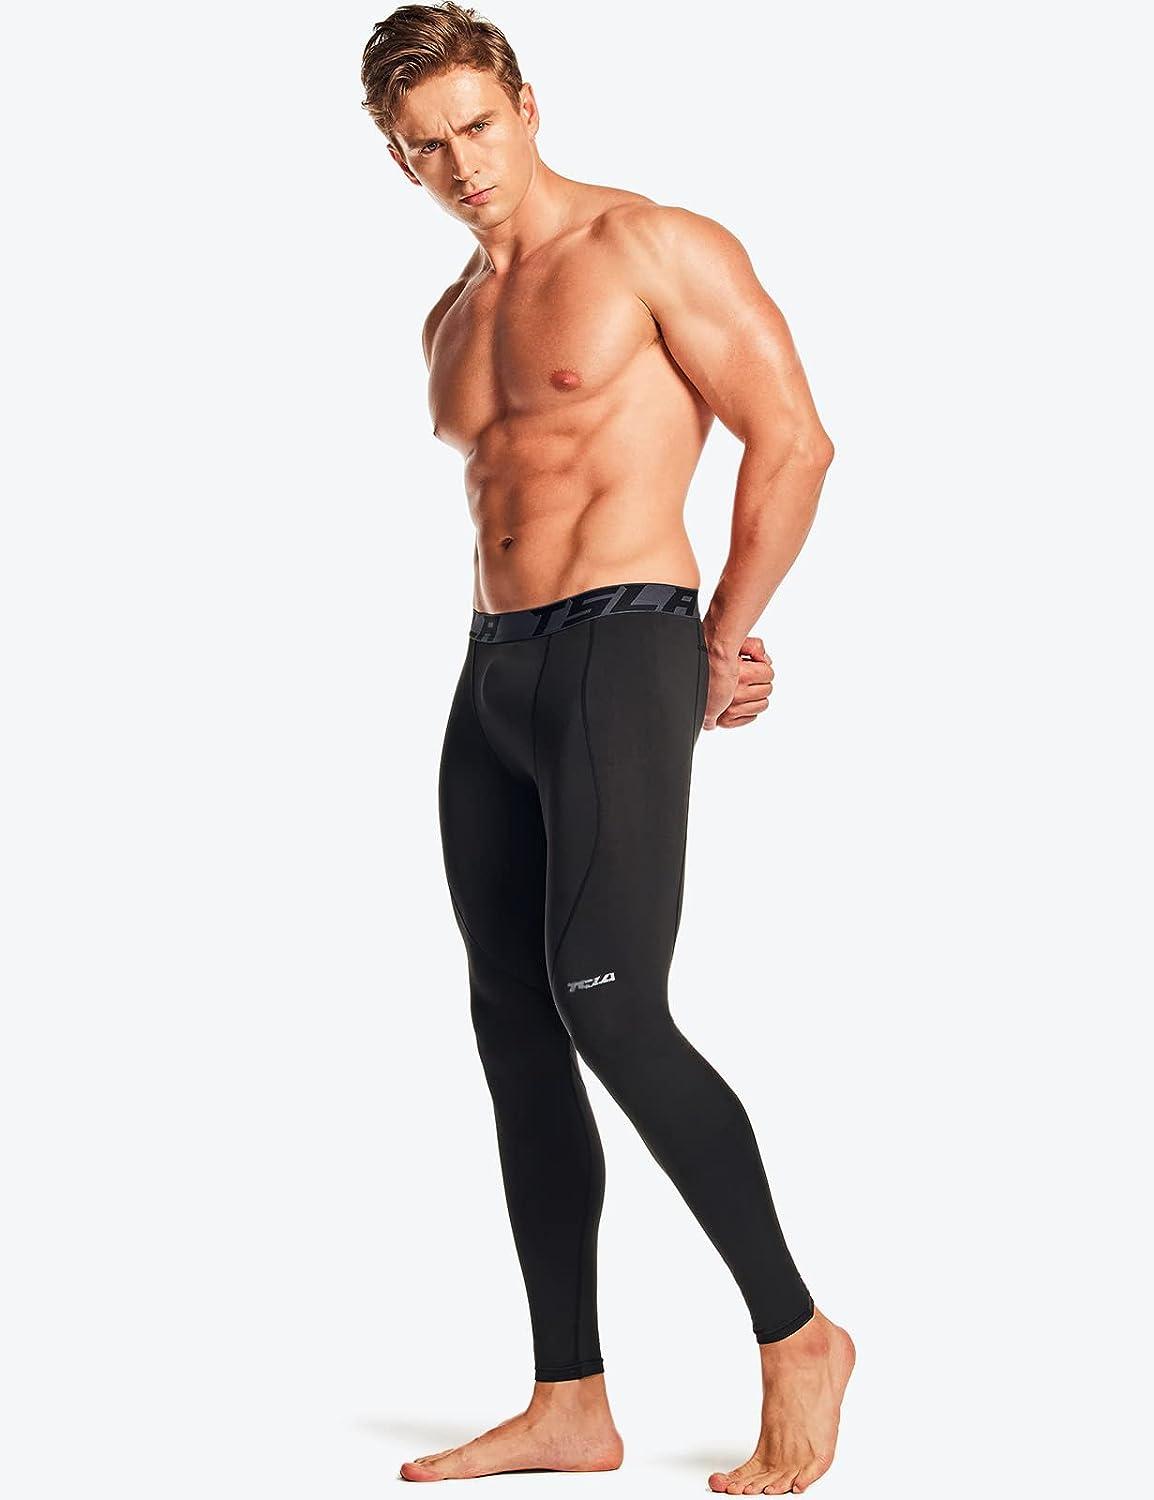 TSLA 1 or 2 Pack Men's Thermal Compression Pants, Athletic Sports Leggings  & Running Tights, Wintergear